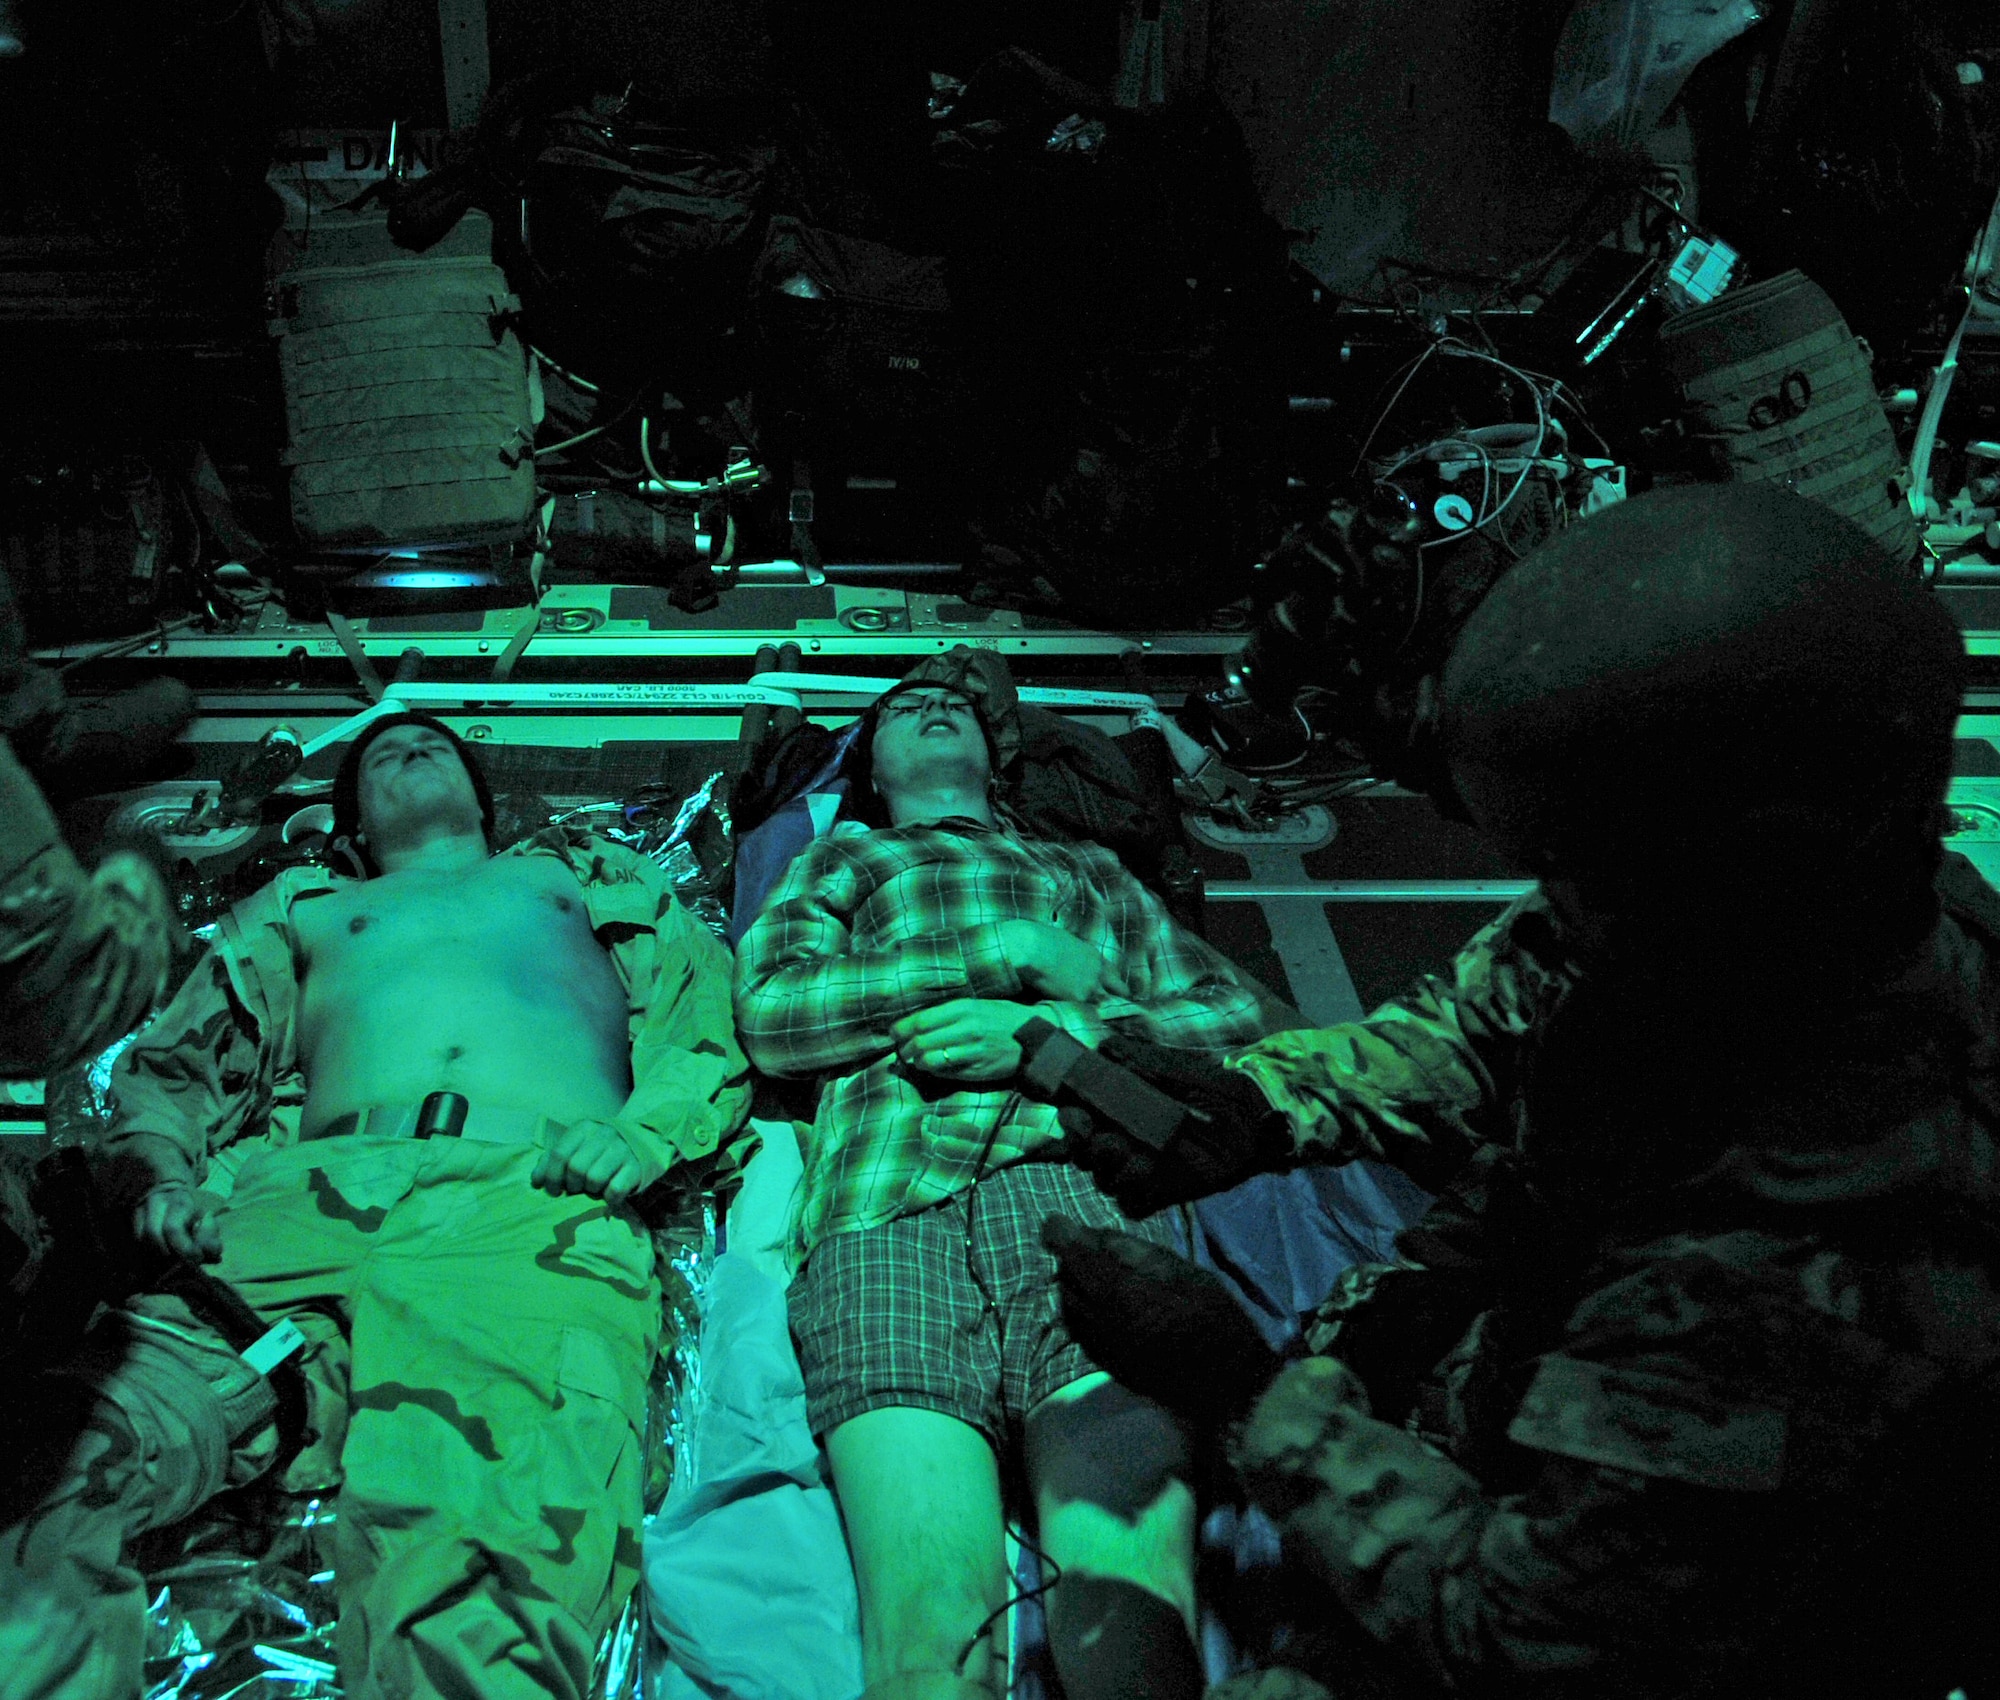 U.S. Air Force Airmen from the 352nd Special Operations Support Squadron Medical Operations Flight examine simulated patients’ injuries Nov. 20, 2013, during a casualty evacuation exercise. The 67th Special Operations Squadron and 352nd SOSS participated in the CASEVAC training, which tested Airmen on their ability to care for and transport wounded service members under tactical conditions similar to what would be encountered in a combat environment. (U.S. Air Force photo by Senior Airman Christine Griffiths/Released)